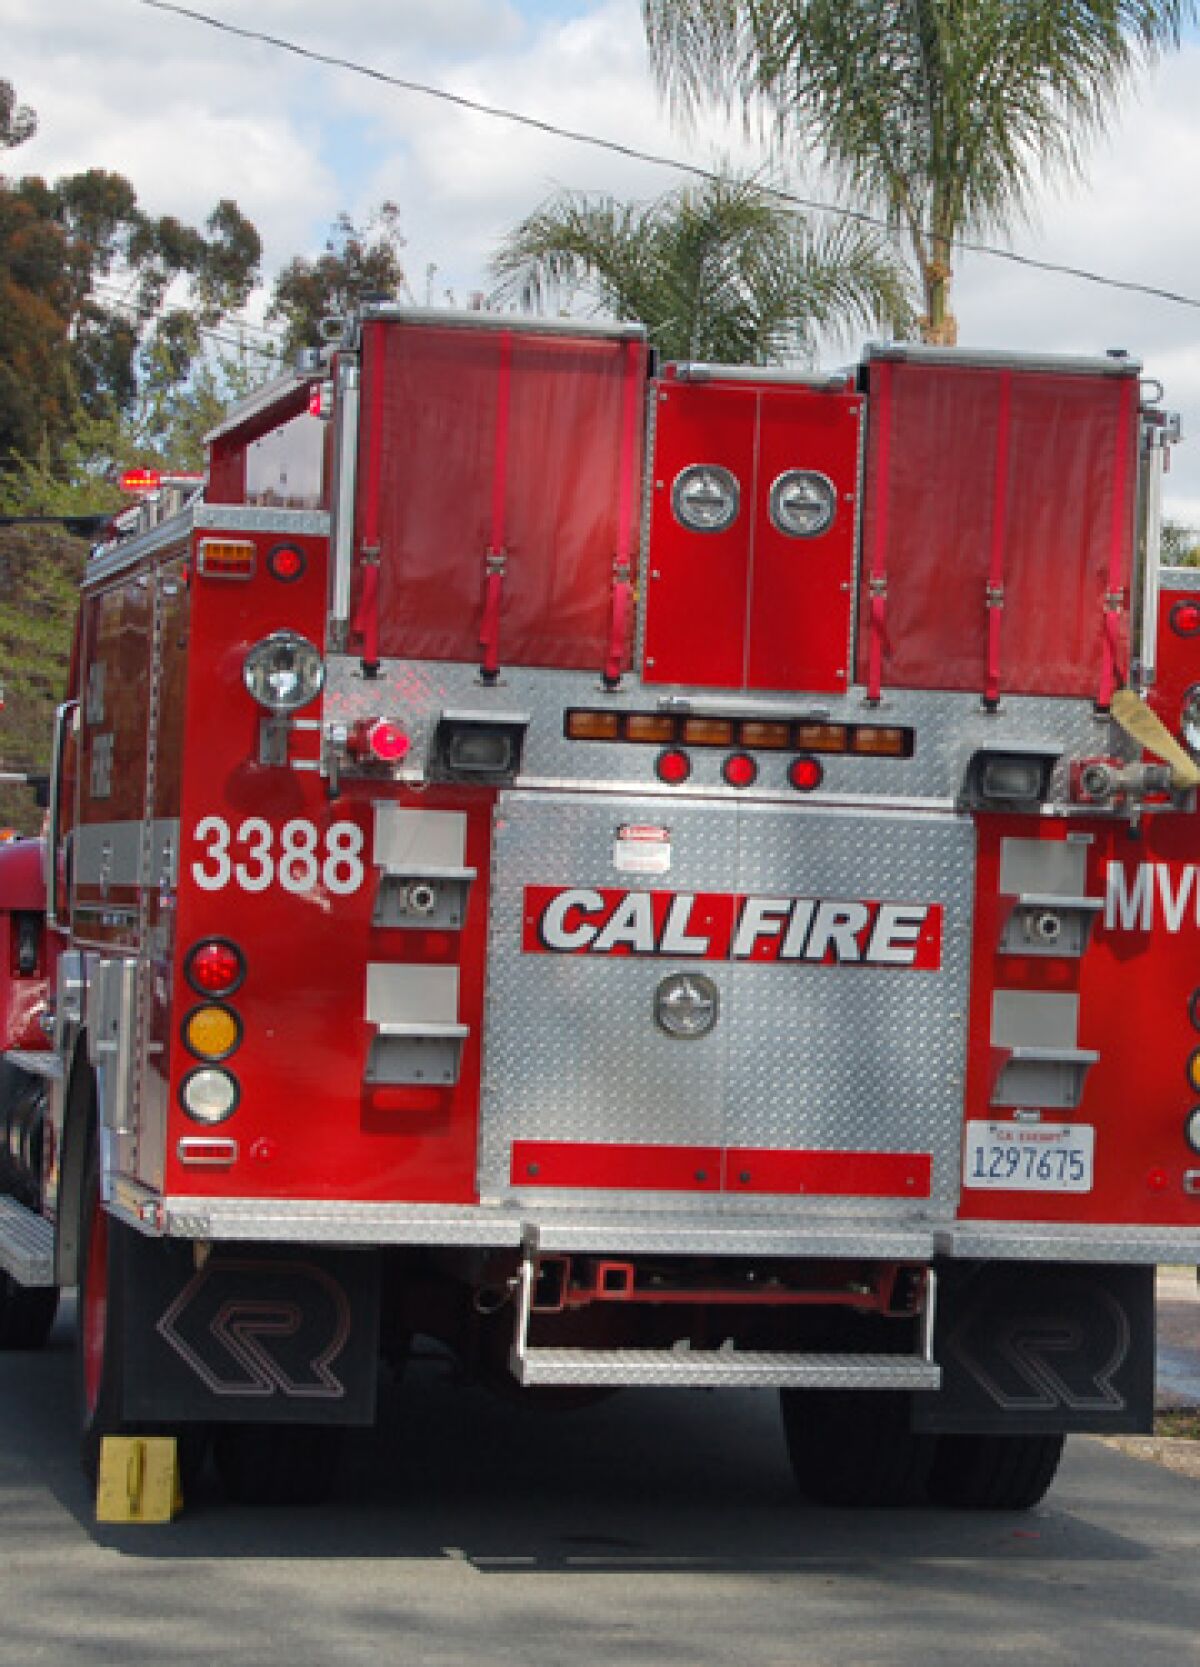 Cal Fire's redesigned website features a more user-friendly structure and timely updates during wildfires, officials said.